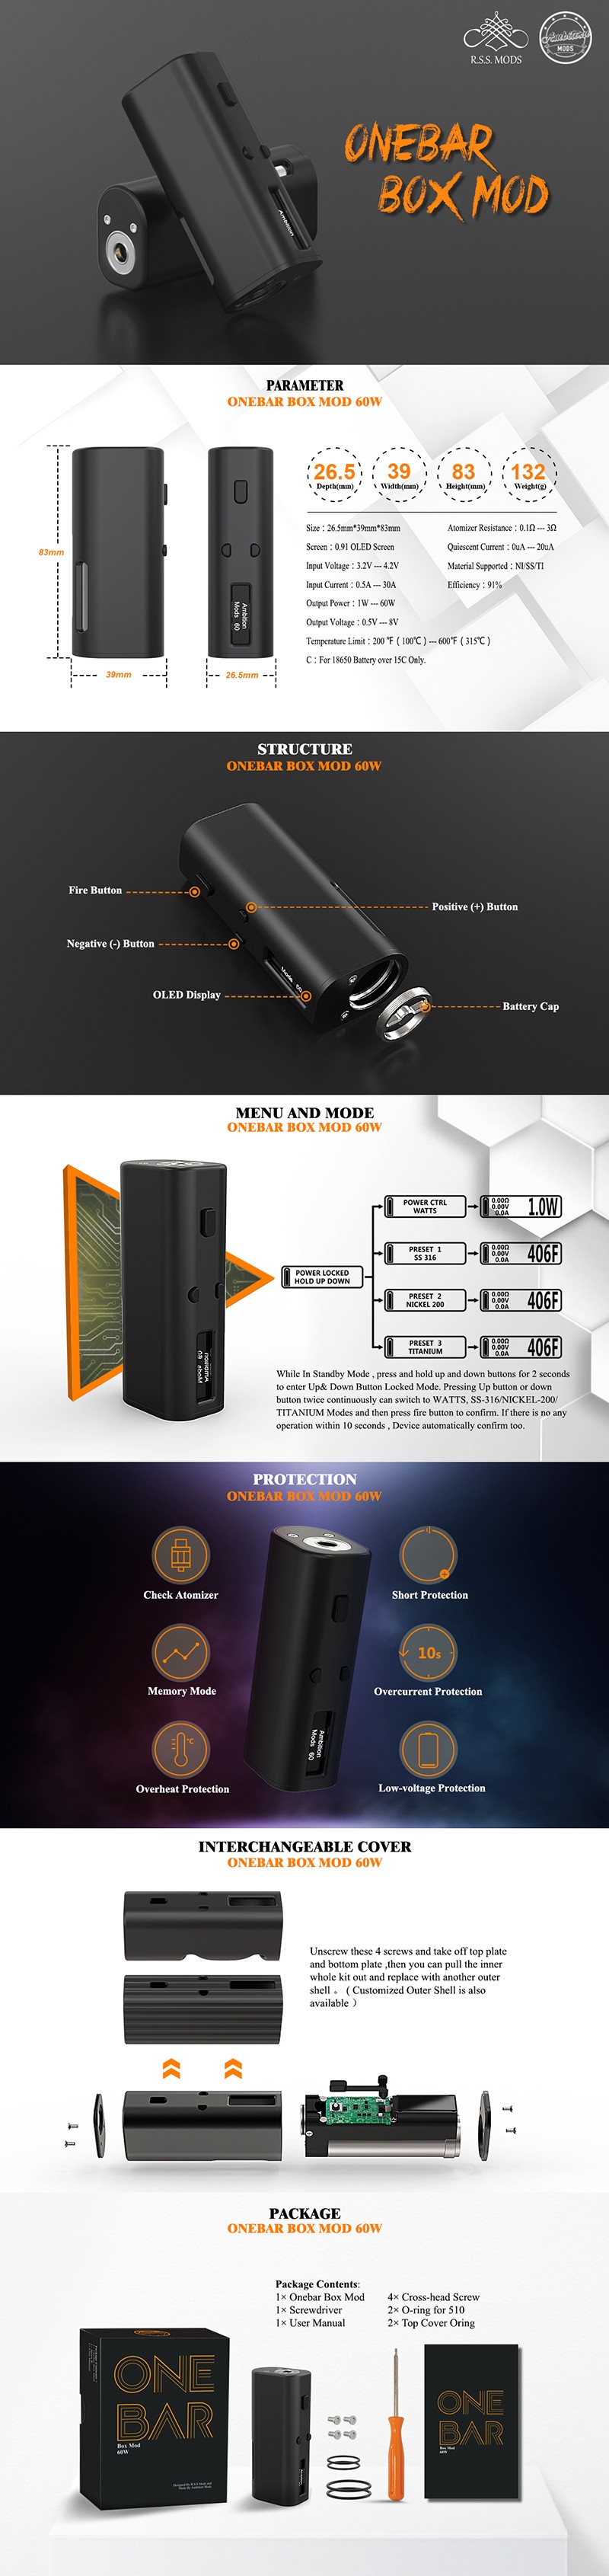 Ambition Mods and R. S. S. Mods Onebar Box Mod 60W